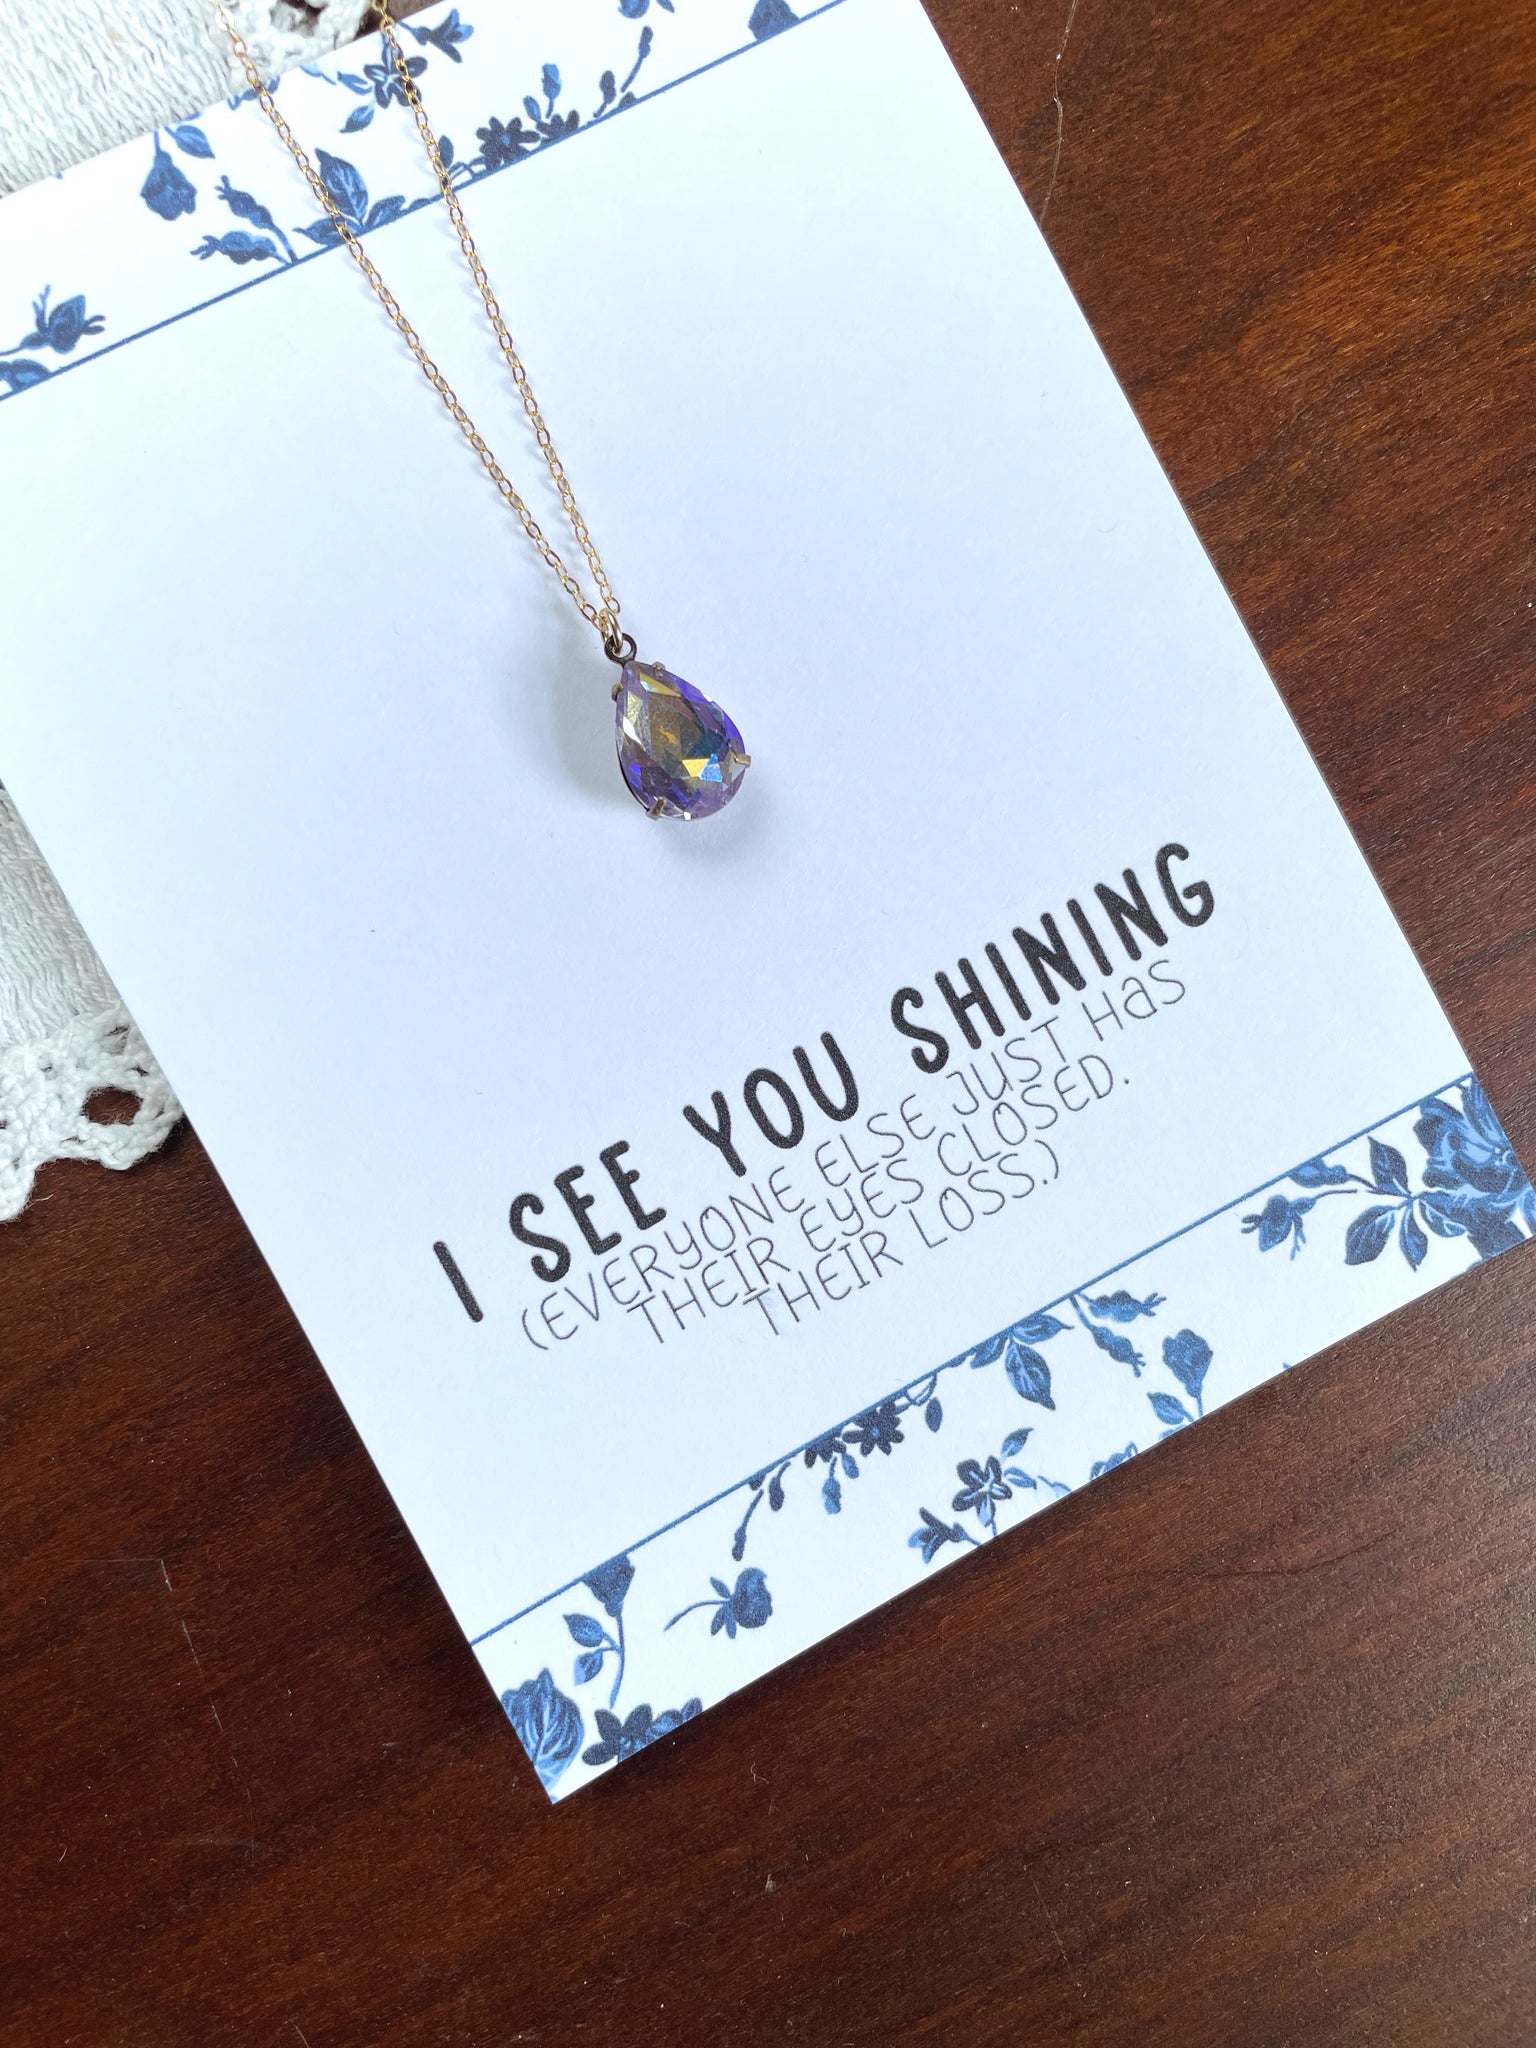 I SEE YOU SHINING Light Purple Iridescent Necklace